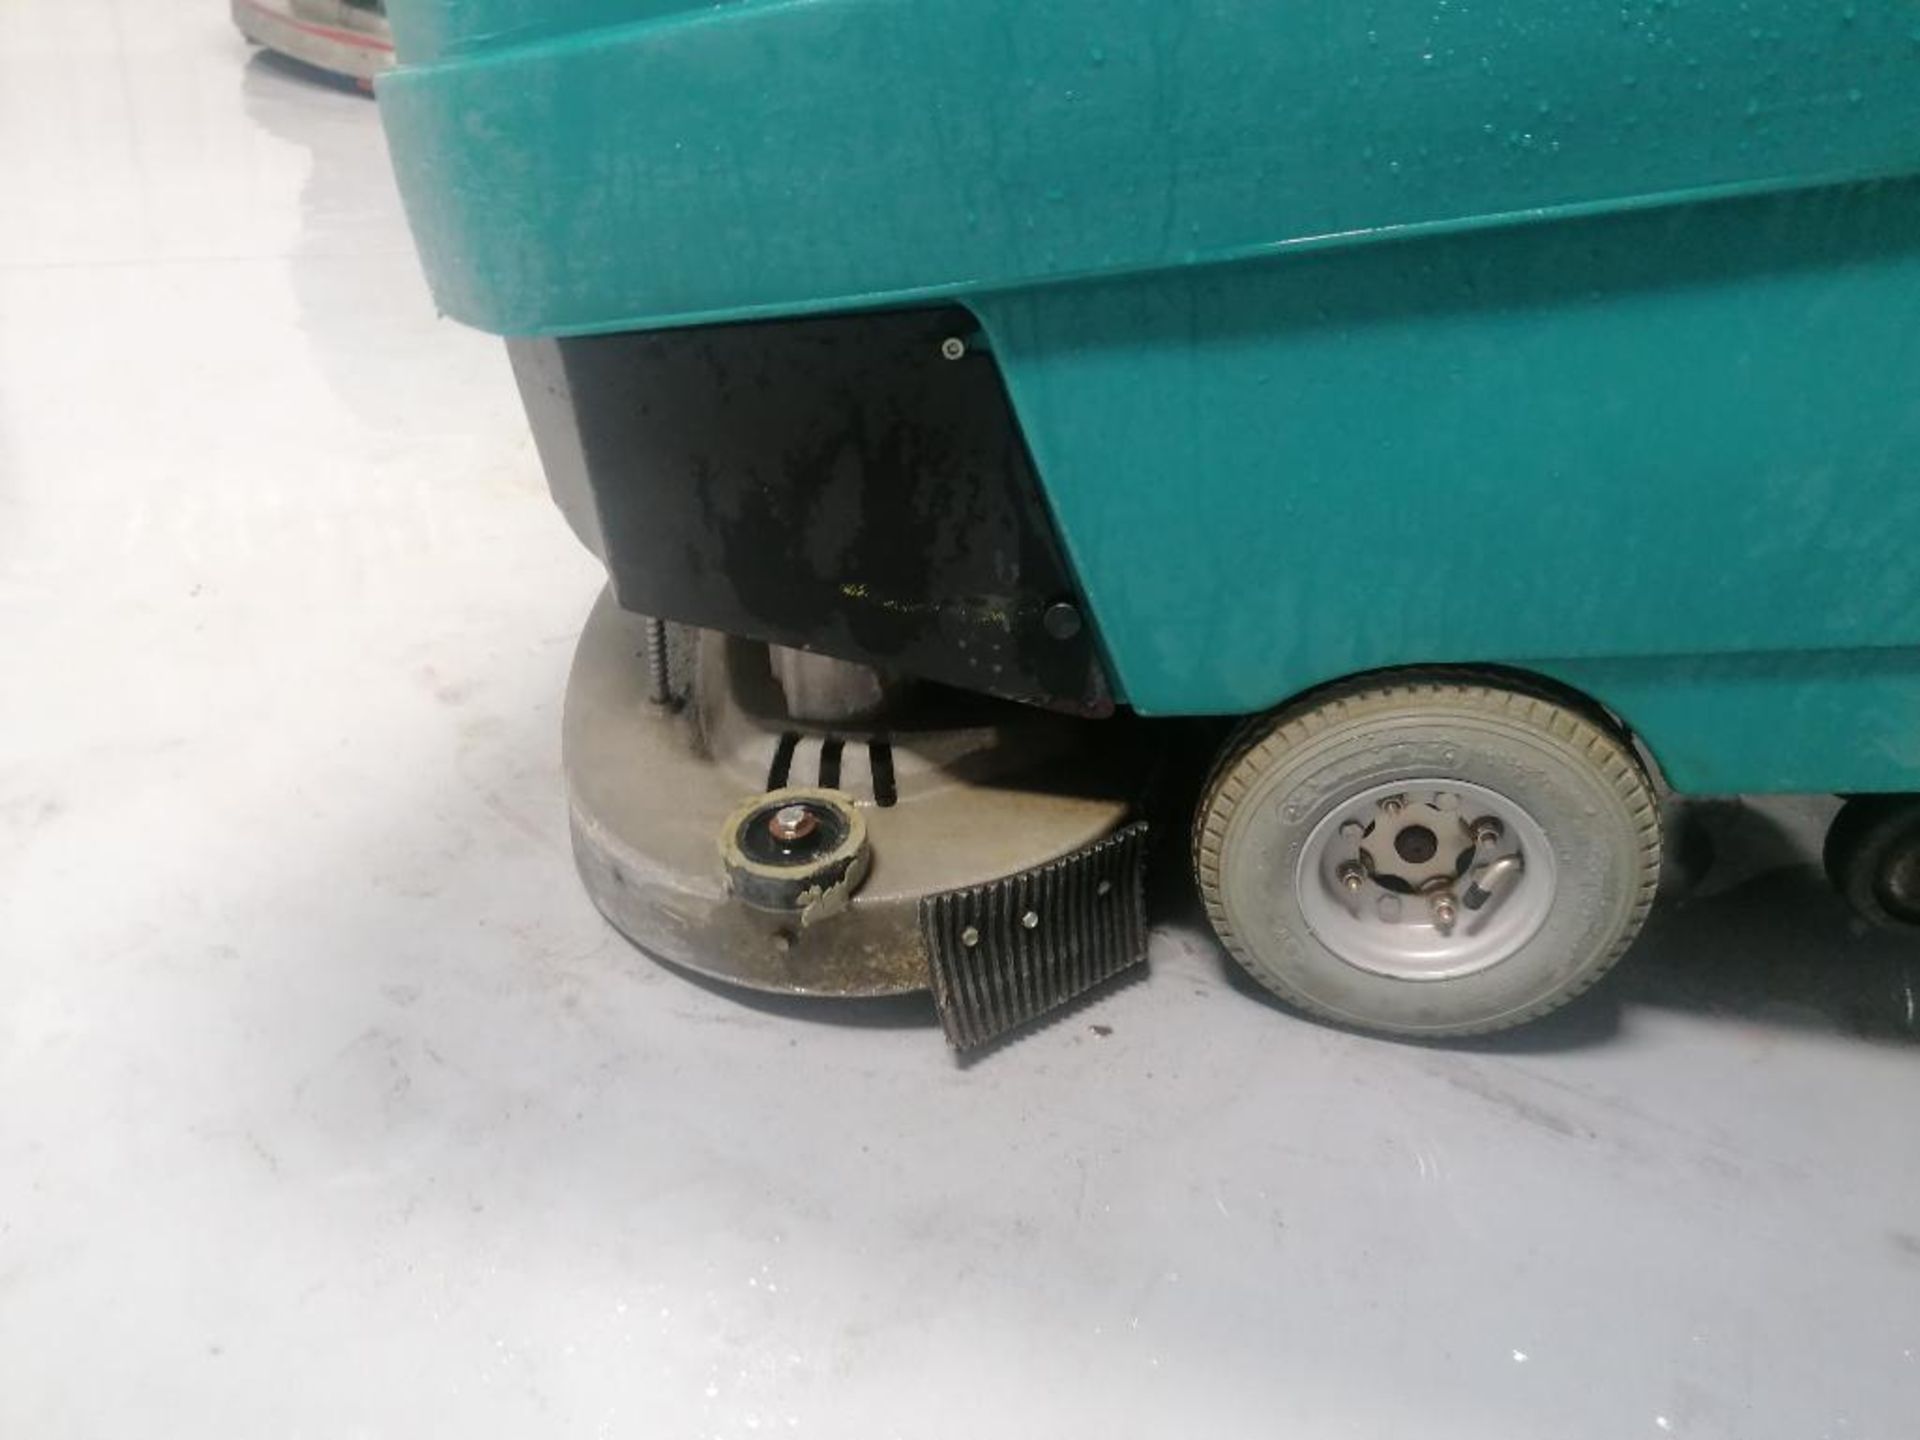 Tennant 5400 Floor Scrubber, Serial #540010203098, 24 Volts. Located in Mt. Pleasant, IA. - Image 14 of 17